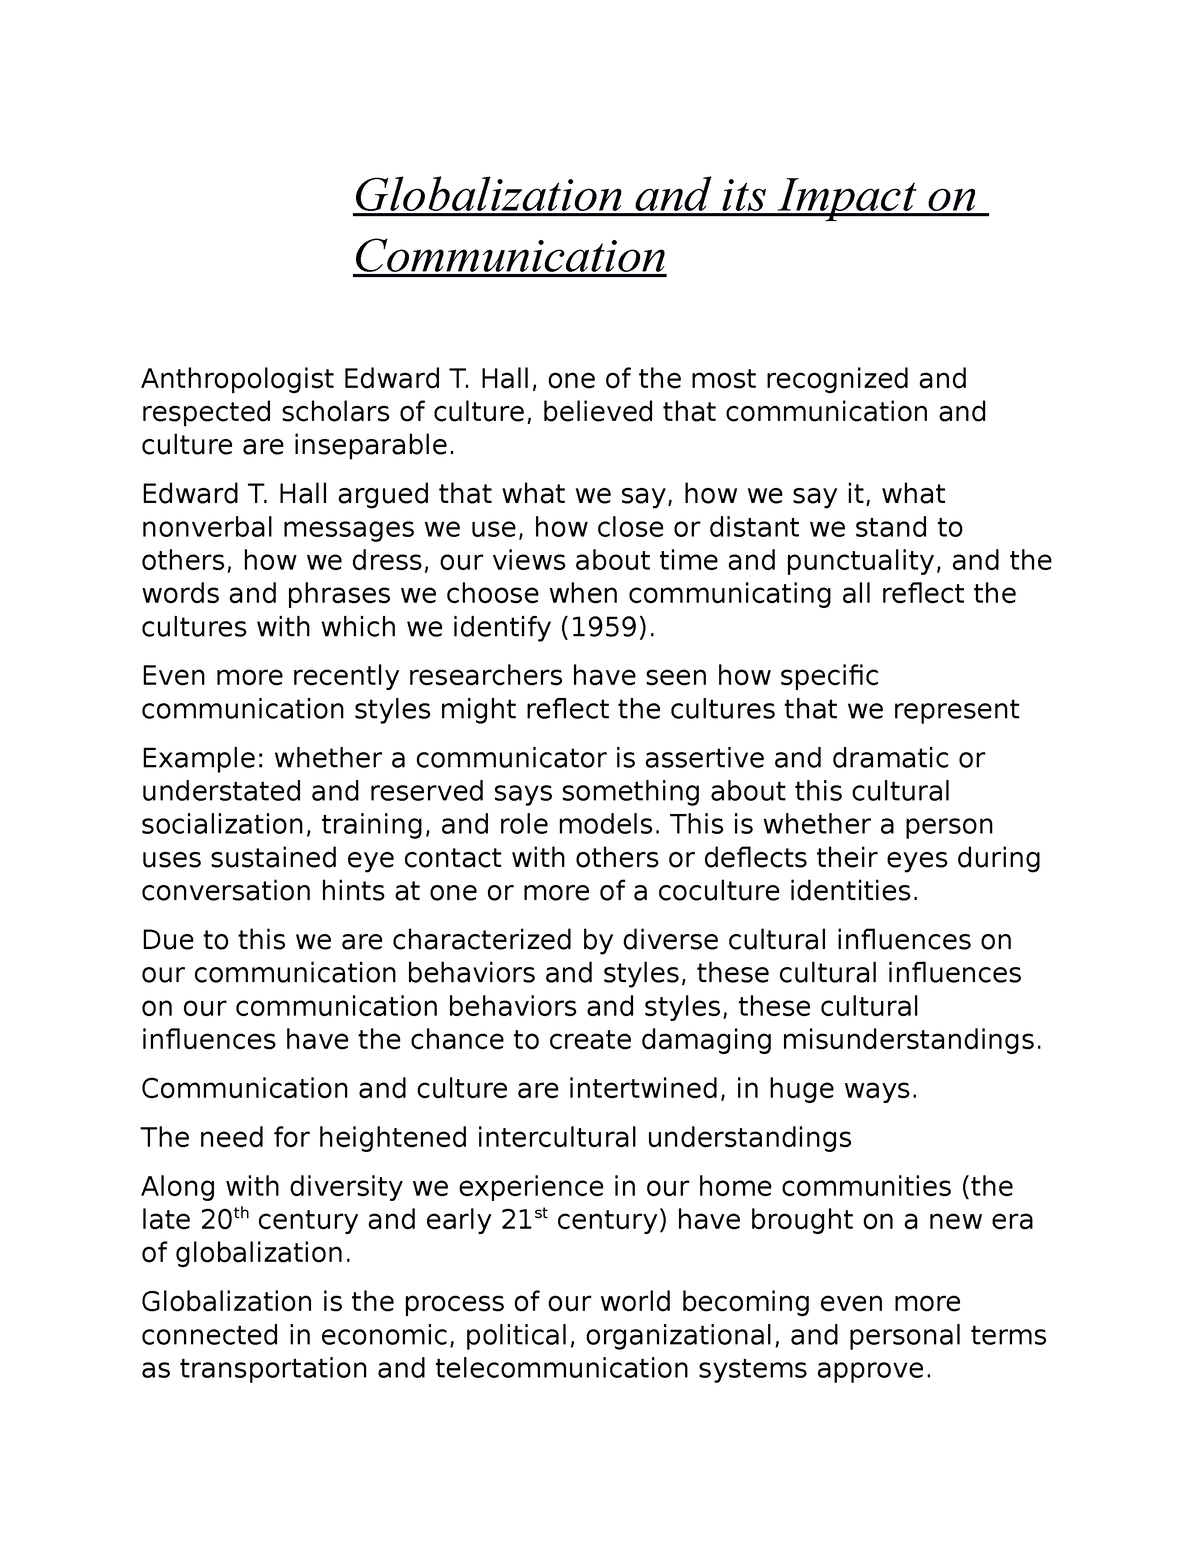 essay about the impact of globalization on communication